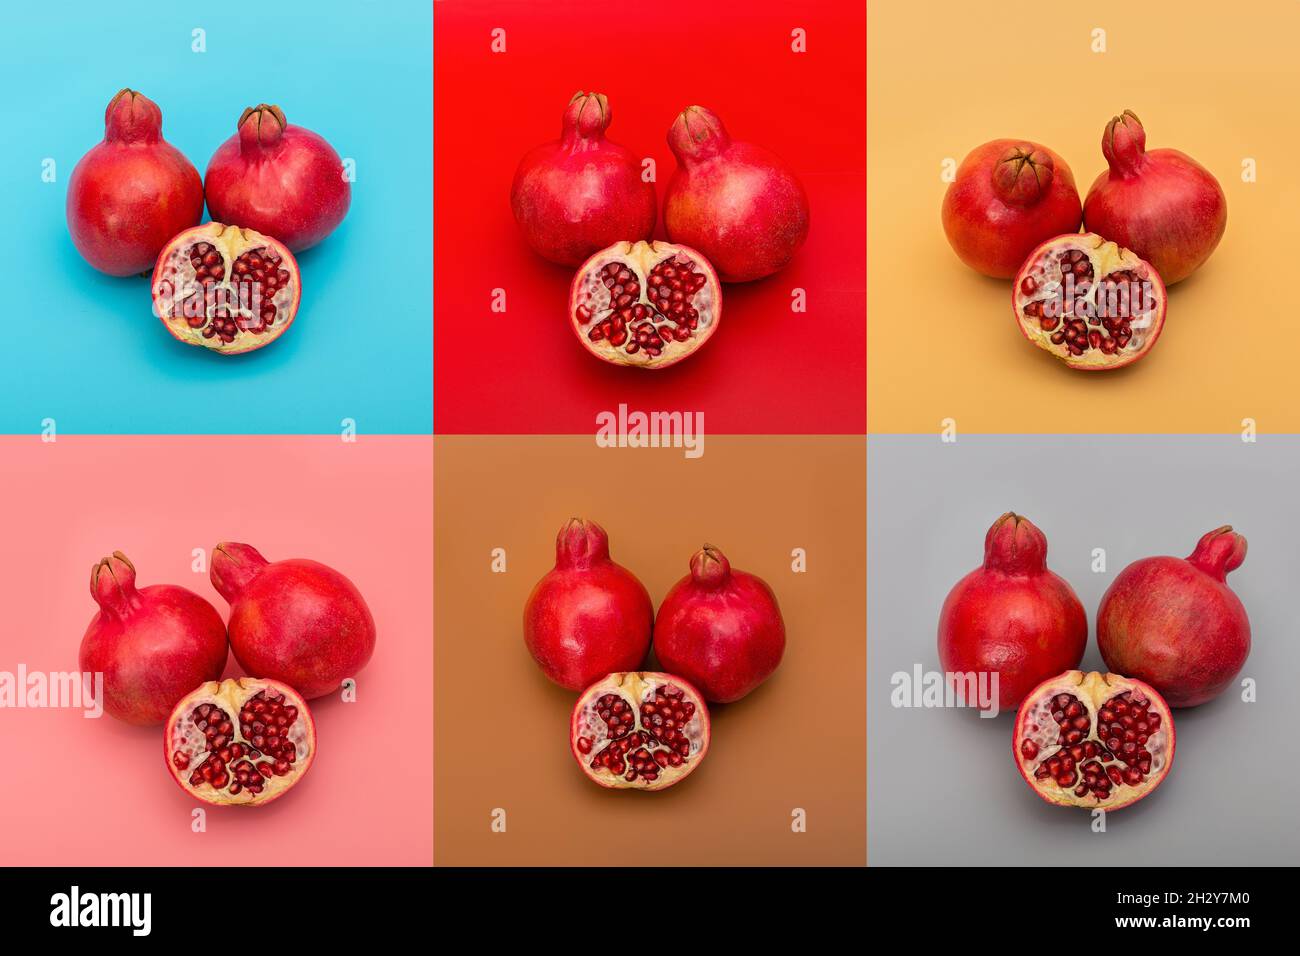 Pomegranate fruits on a bright, colored background Stock Photo